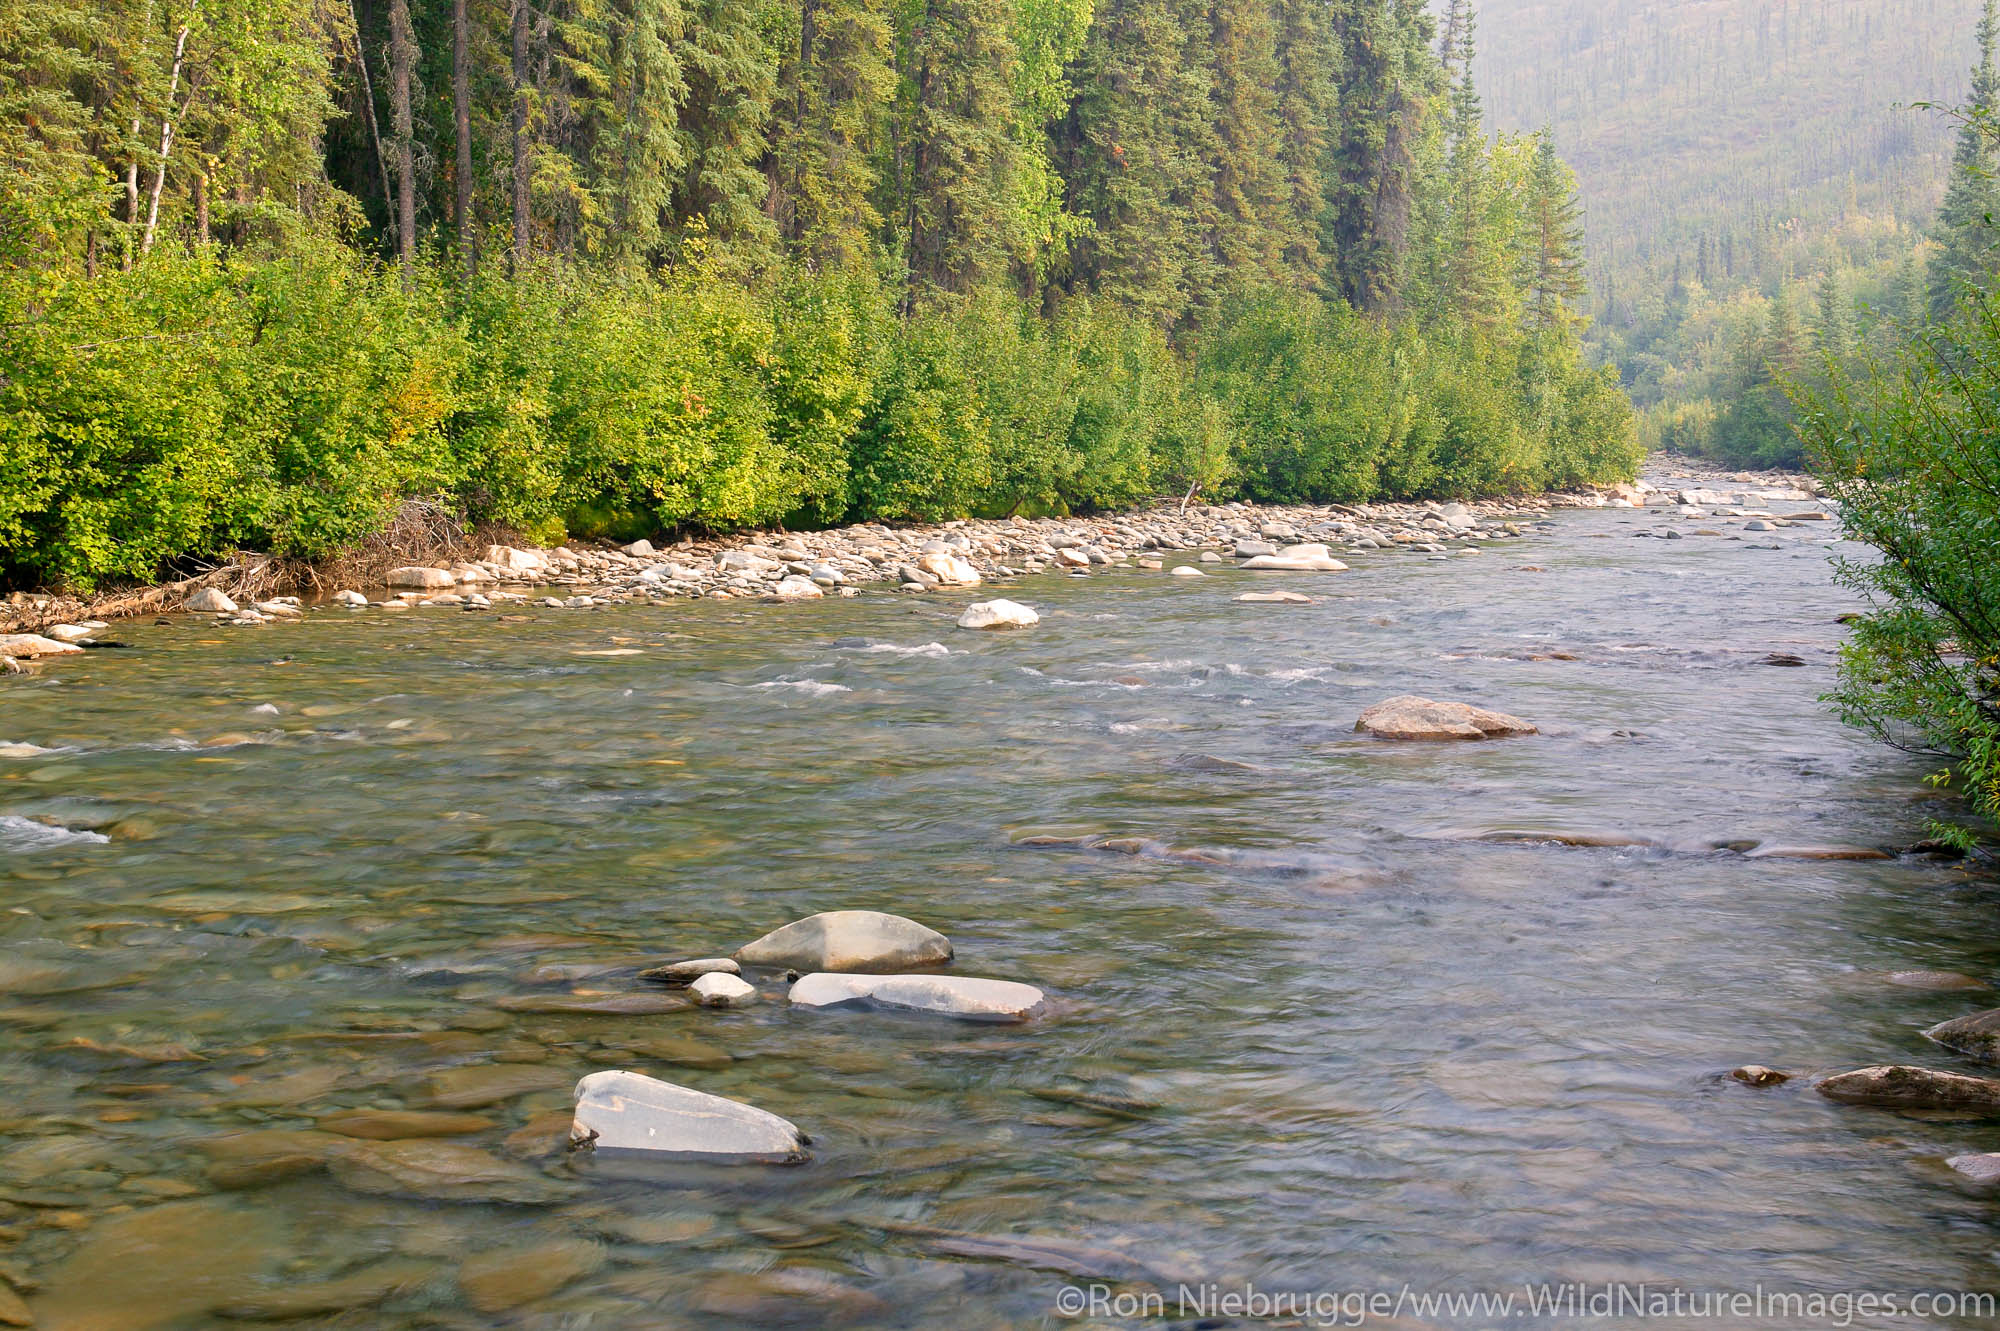 Marion Creek in the Brooks Range from near the Dalton Highway, Coldfoot, Alaska.